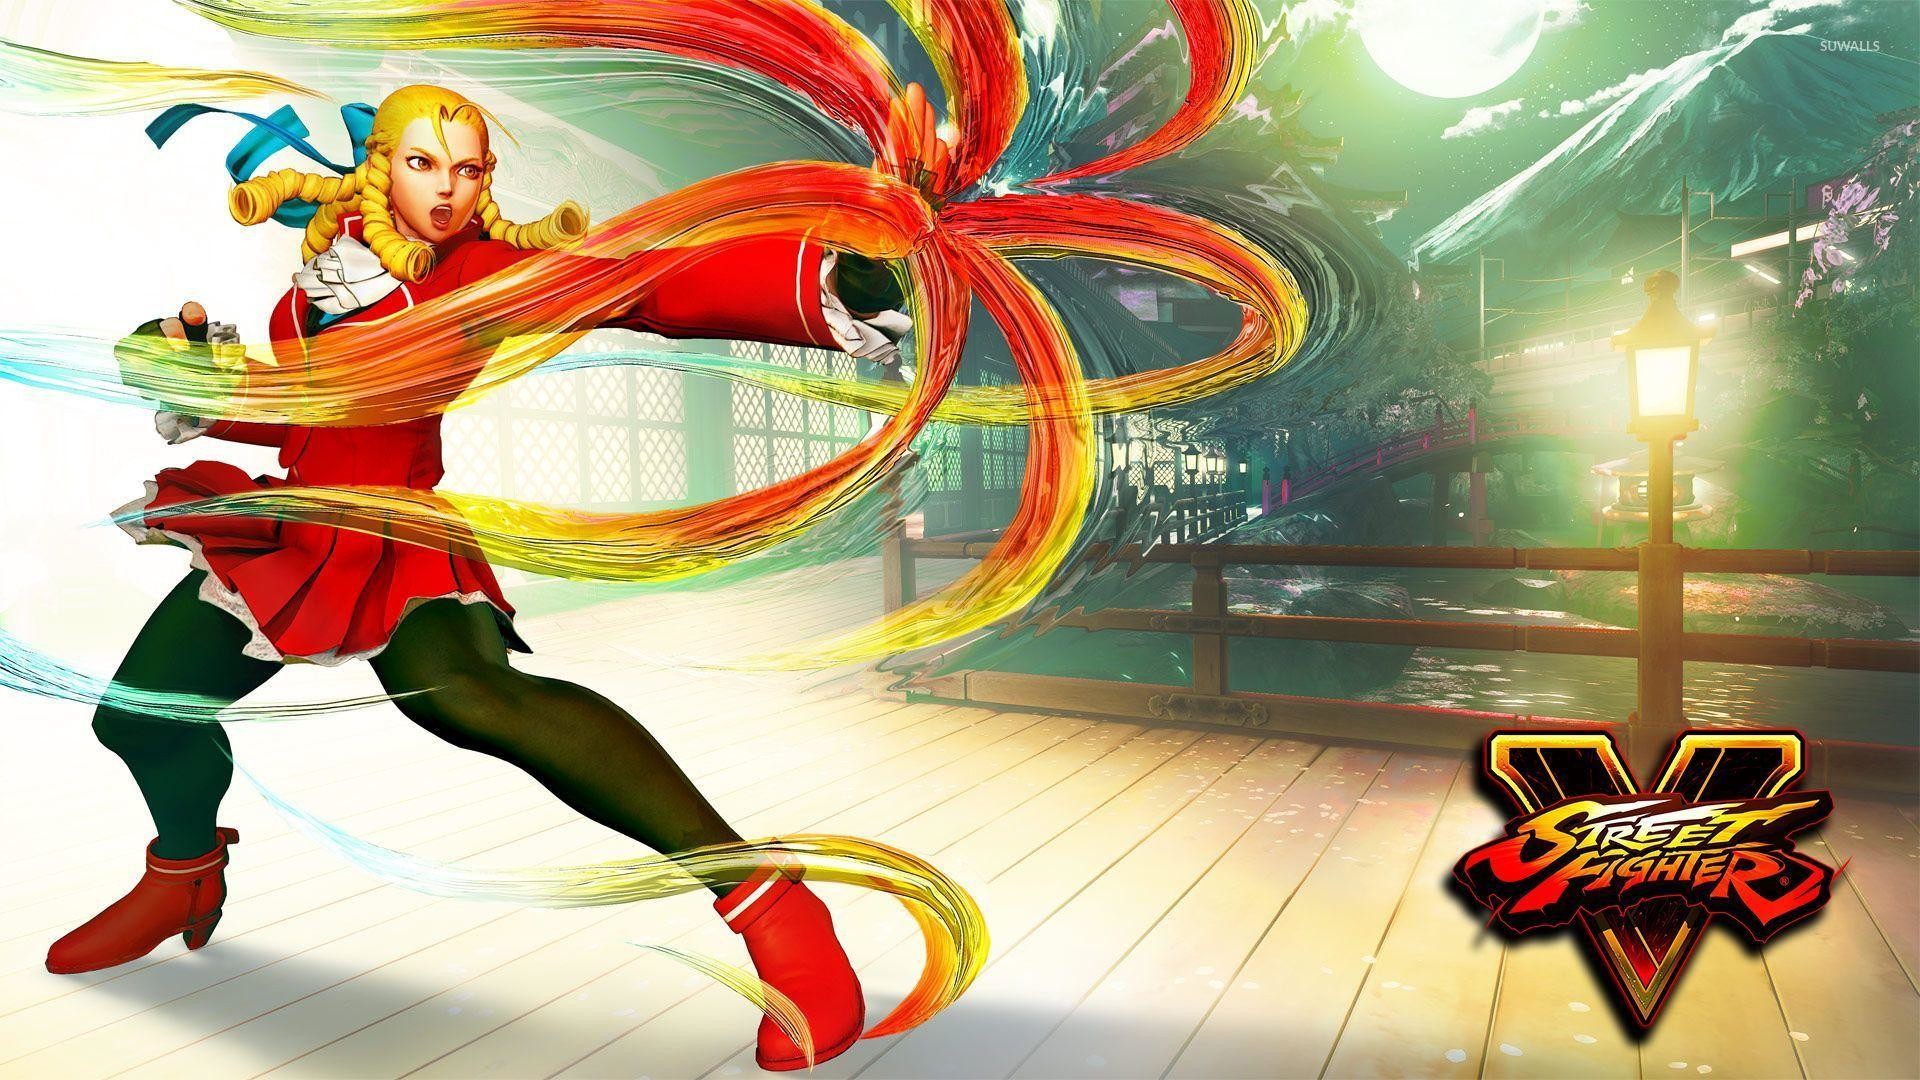 1920x1080 Cammy in Street Fighter V wallpaper - Game wallpapers - #52713